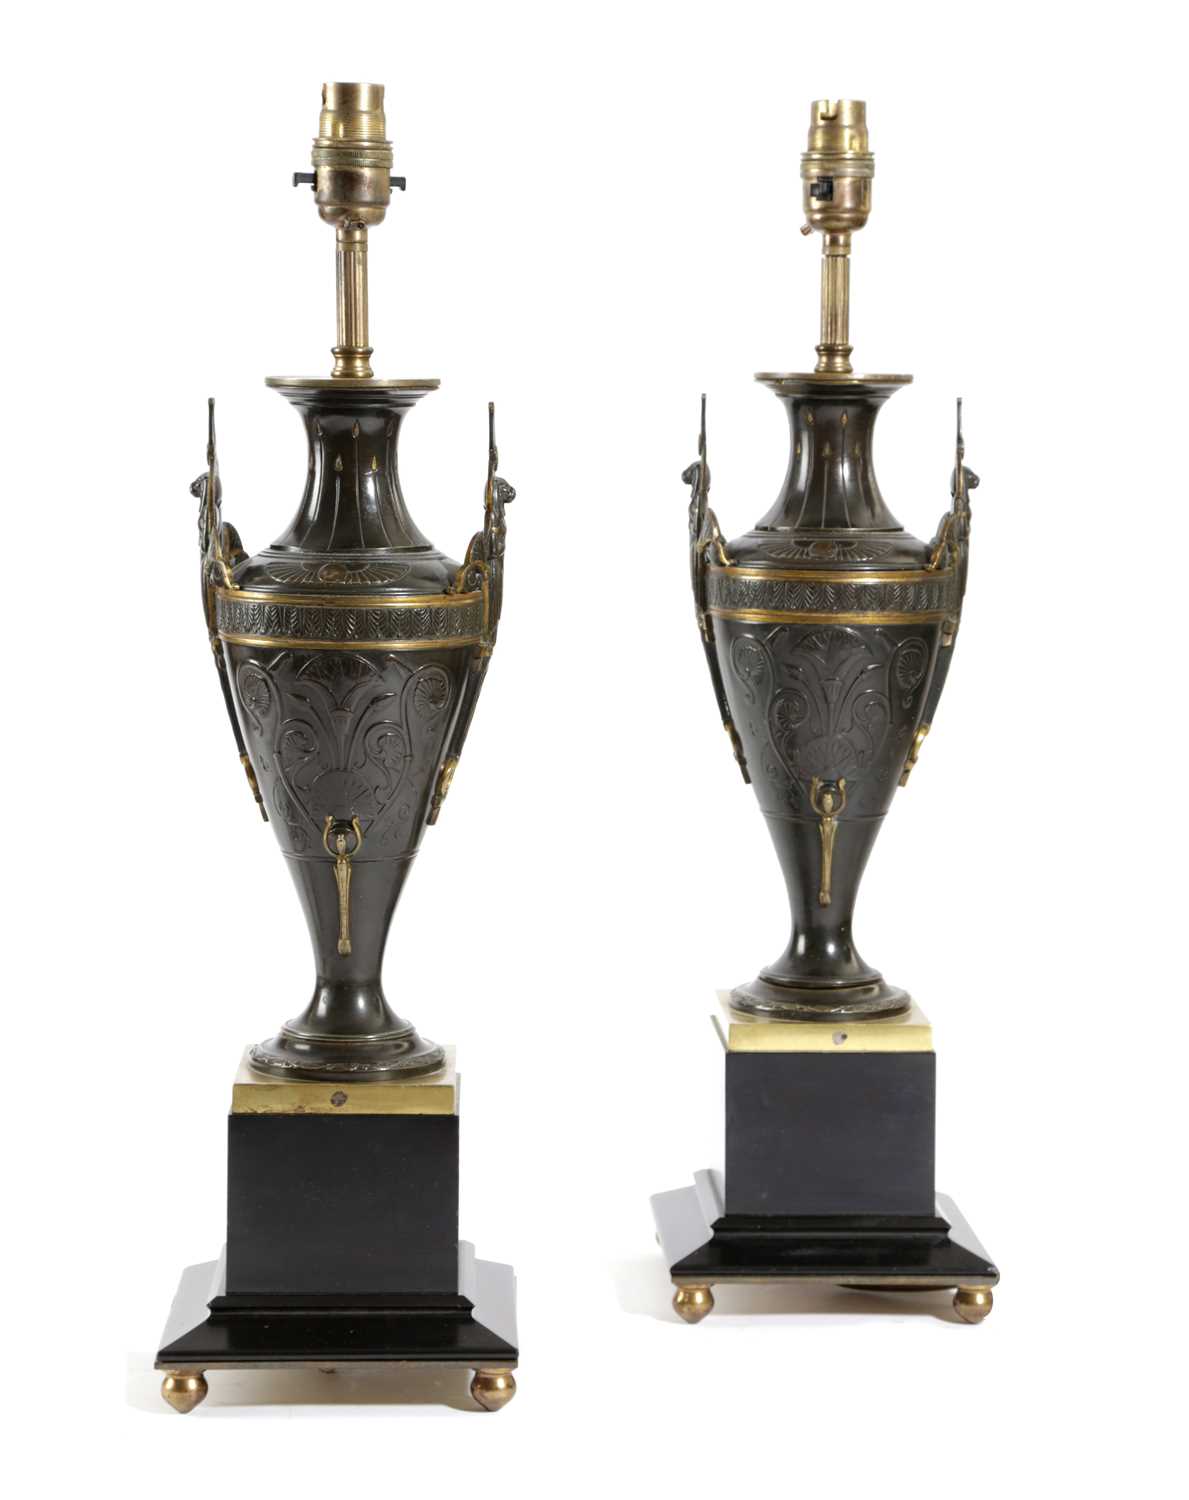 A PAIR OF FRENCH BRONZE AND PARCEL GILT VASE TABLE LAMPS IN EGYPTIAN REVIVAL STYLE, C.1870-80 each